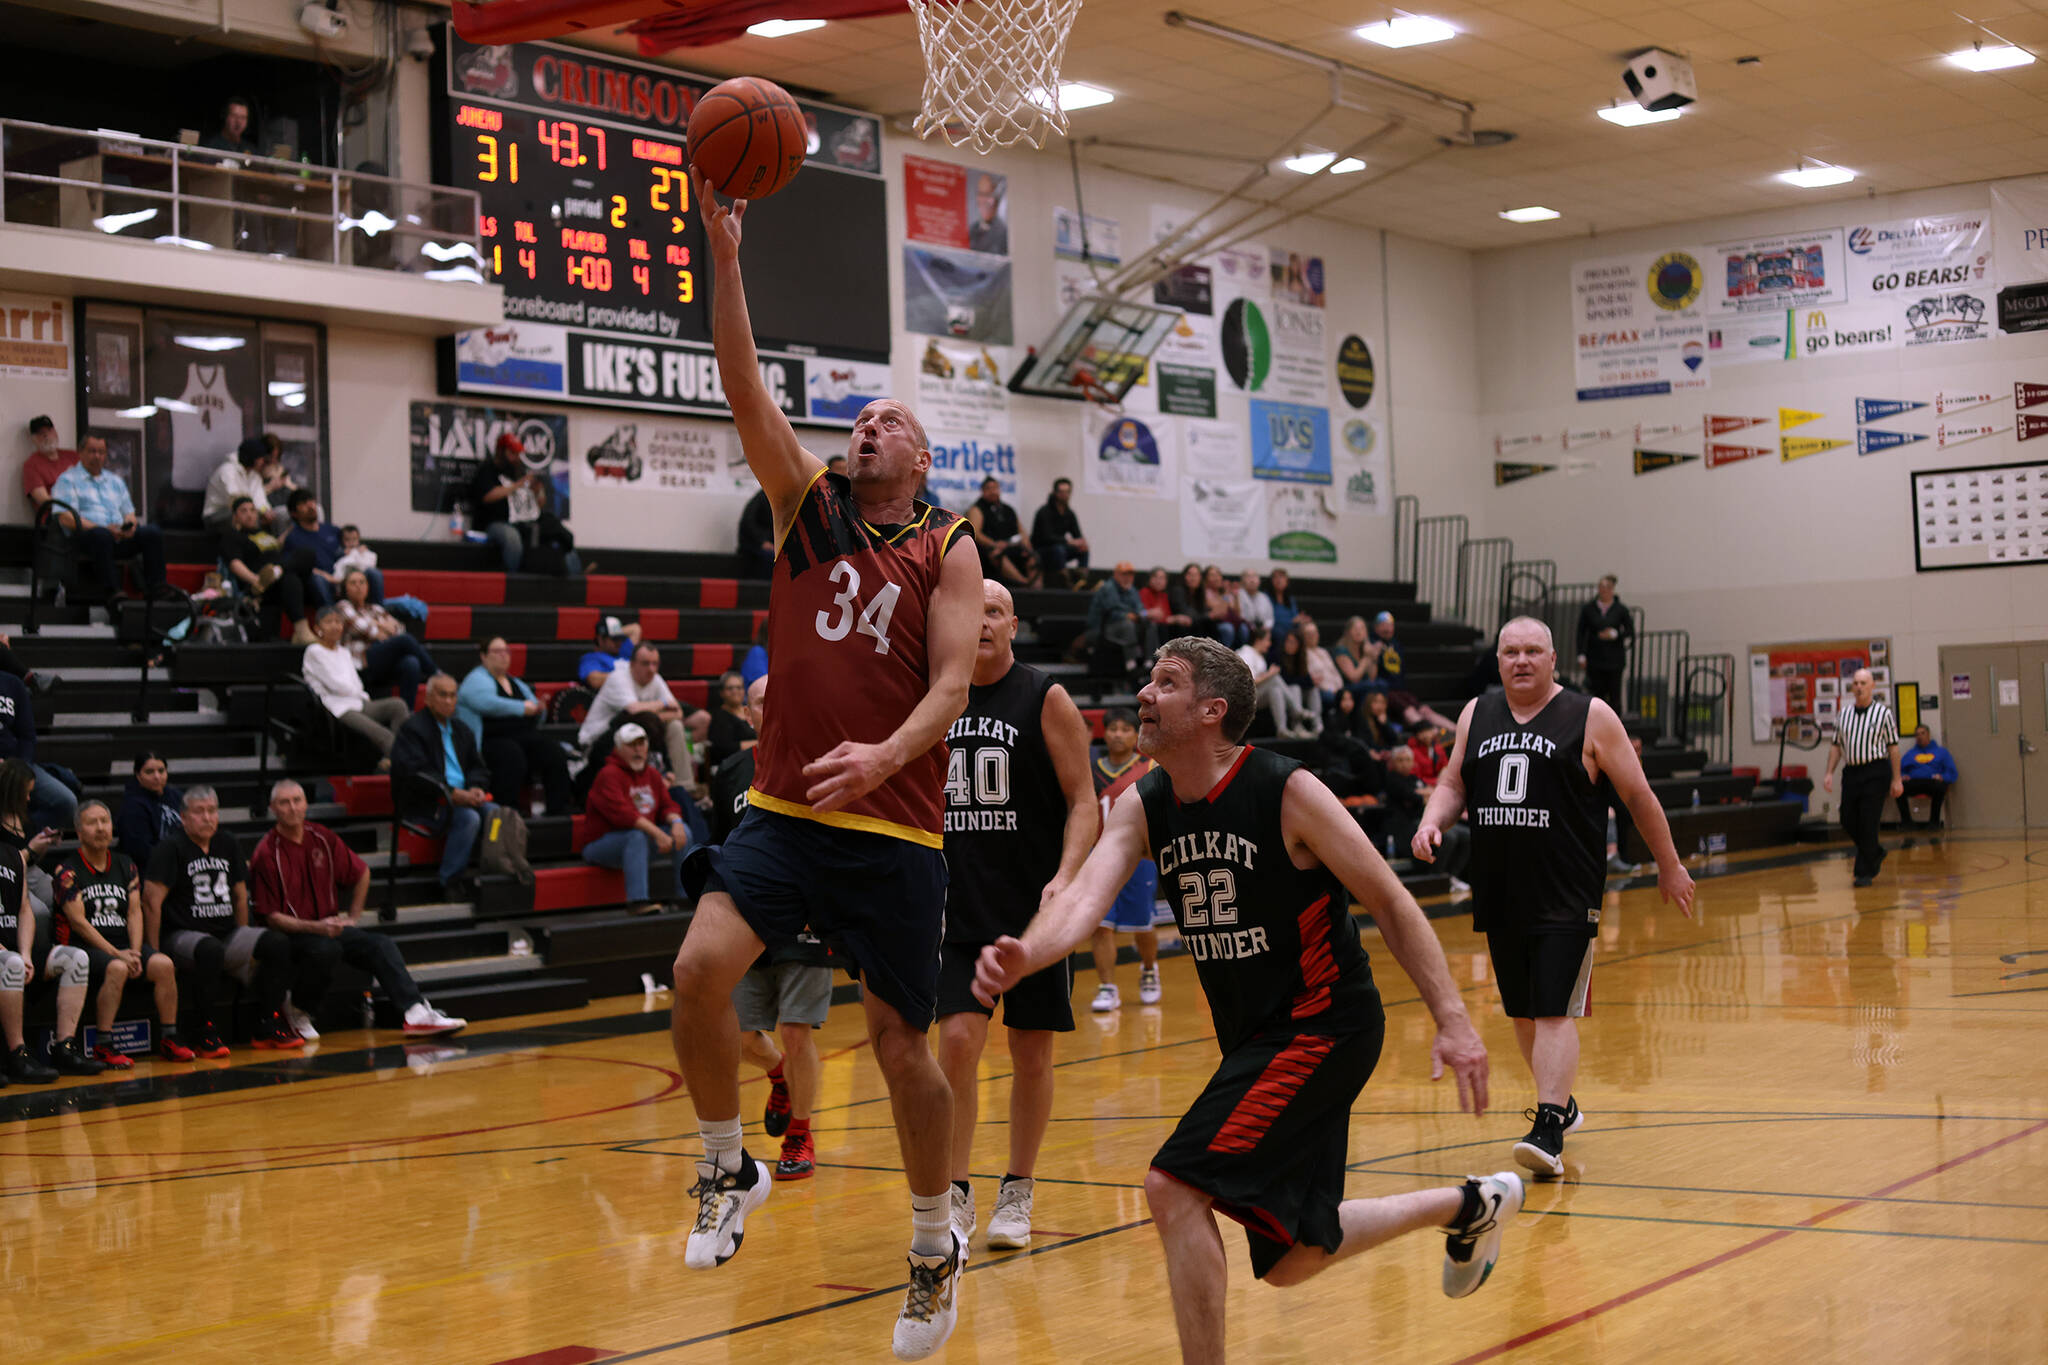 Daylight Saving Time just started, but Juneau’s Jim Carson (34) turned back the clock late in the second quarter of a Masters Bracket game against Klukwan. Carson finished the Thursday night contest with 16 points, and Juneau prevailed 48-39. (Ben Hohenstatt / Juneau Empire)